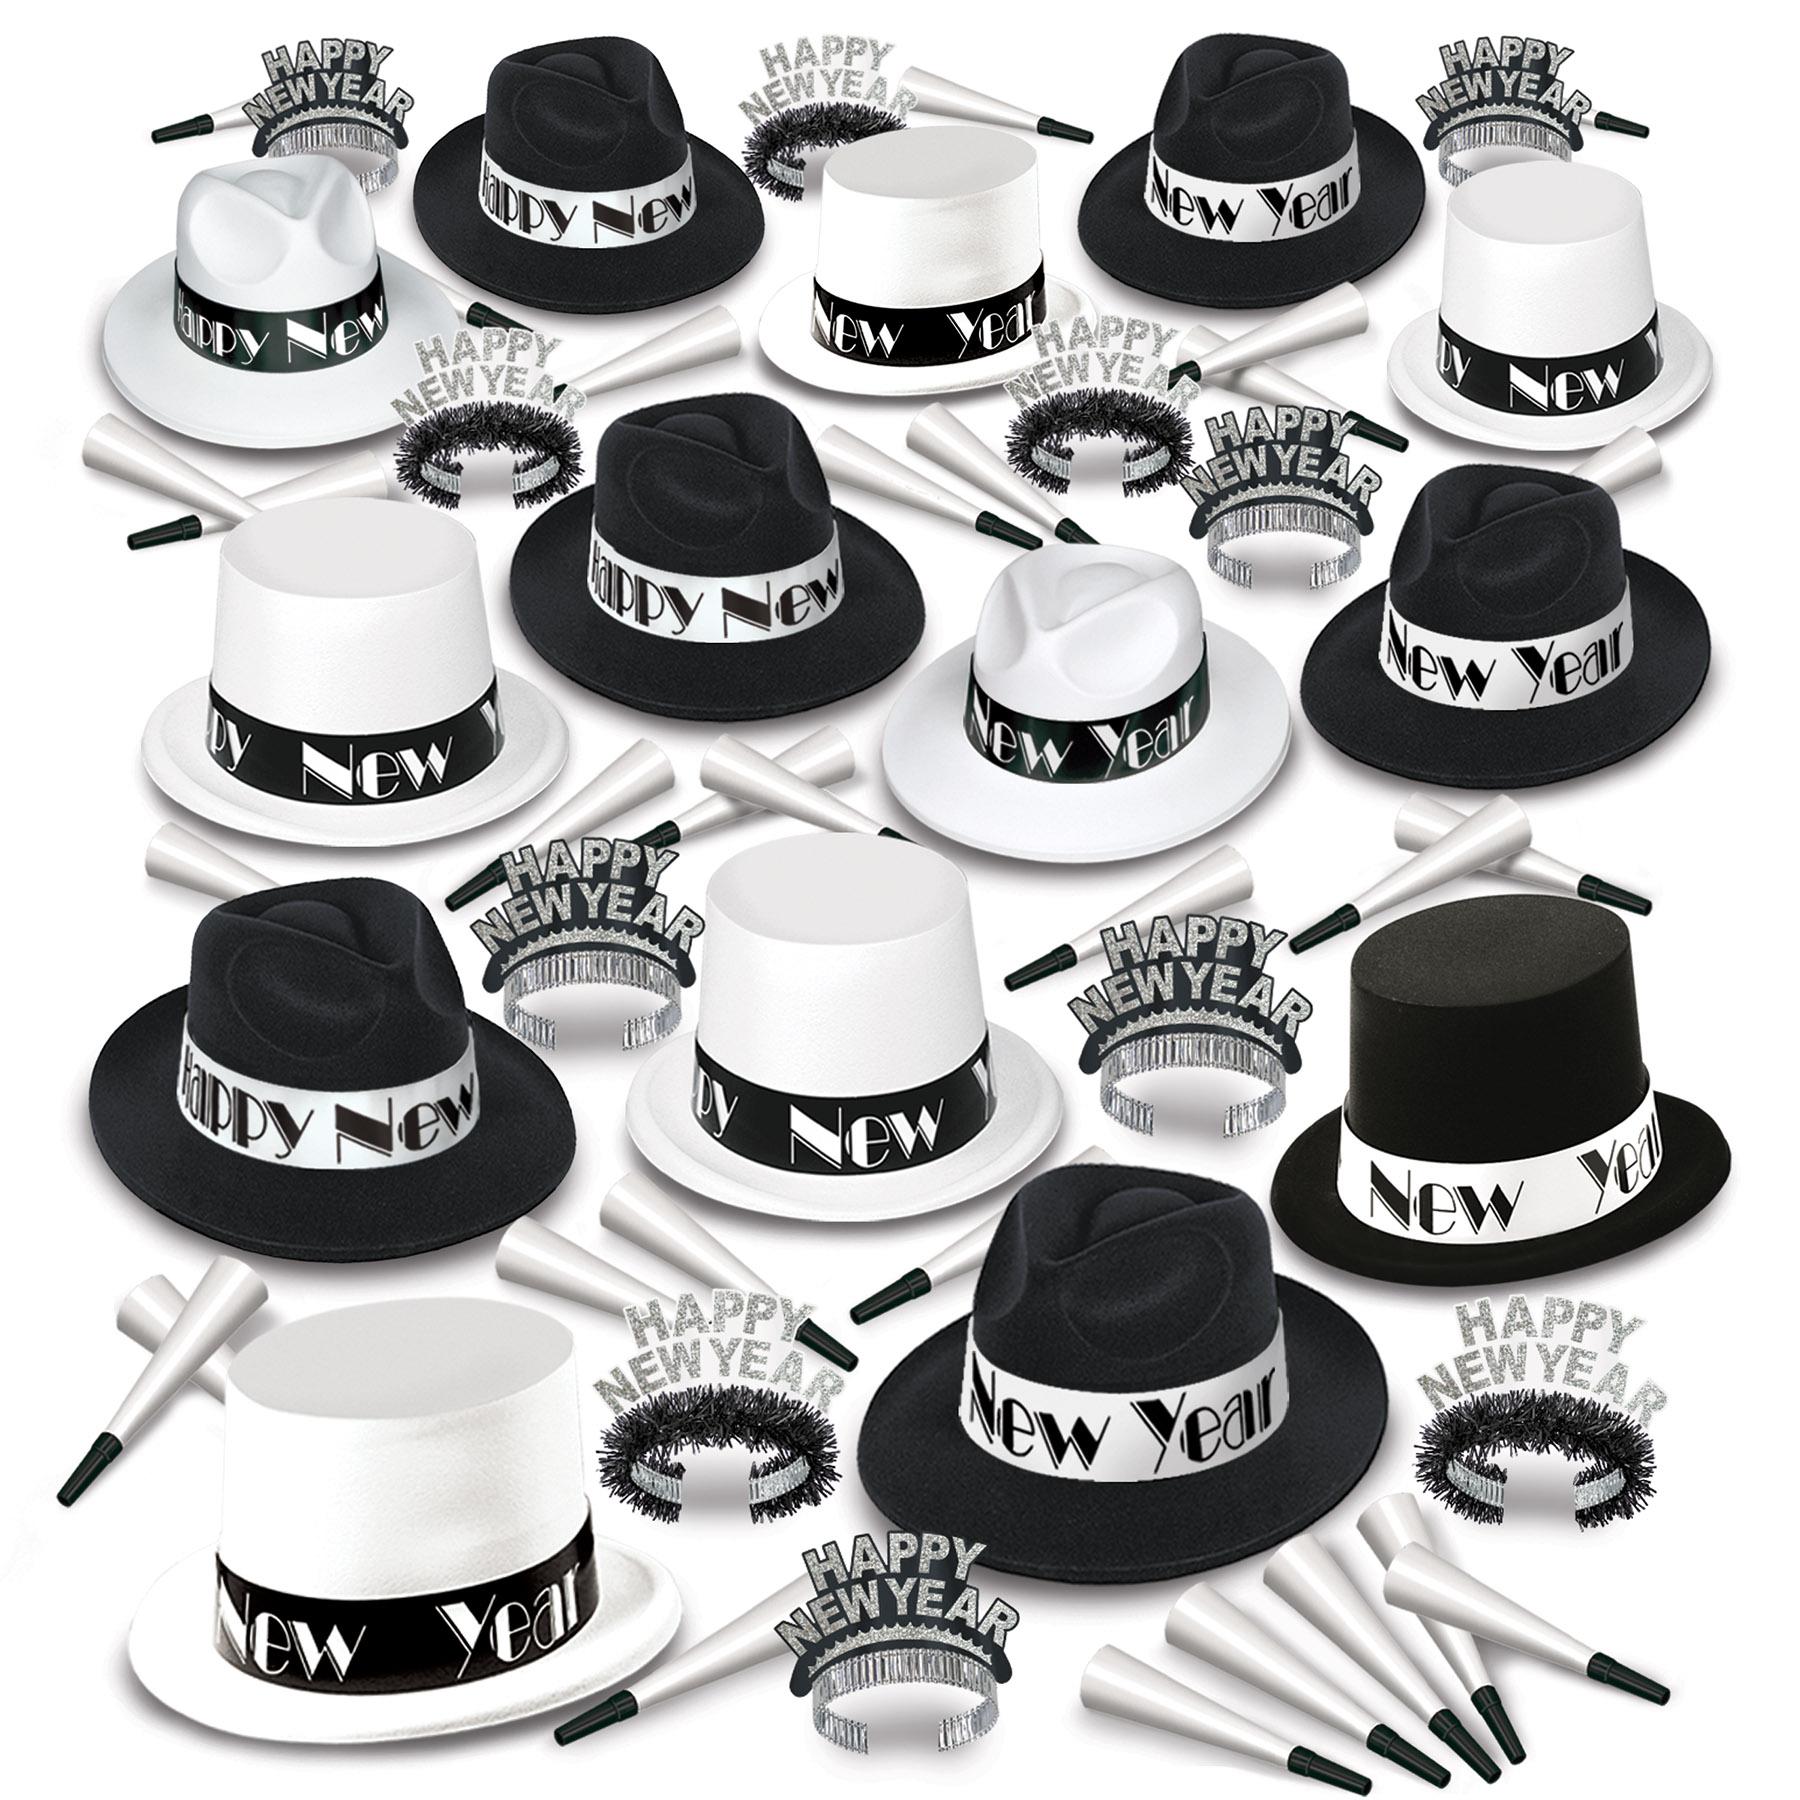 Beistle Roaring 20's New Year's Eve Party Kit for 100 People